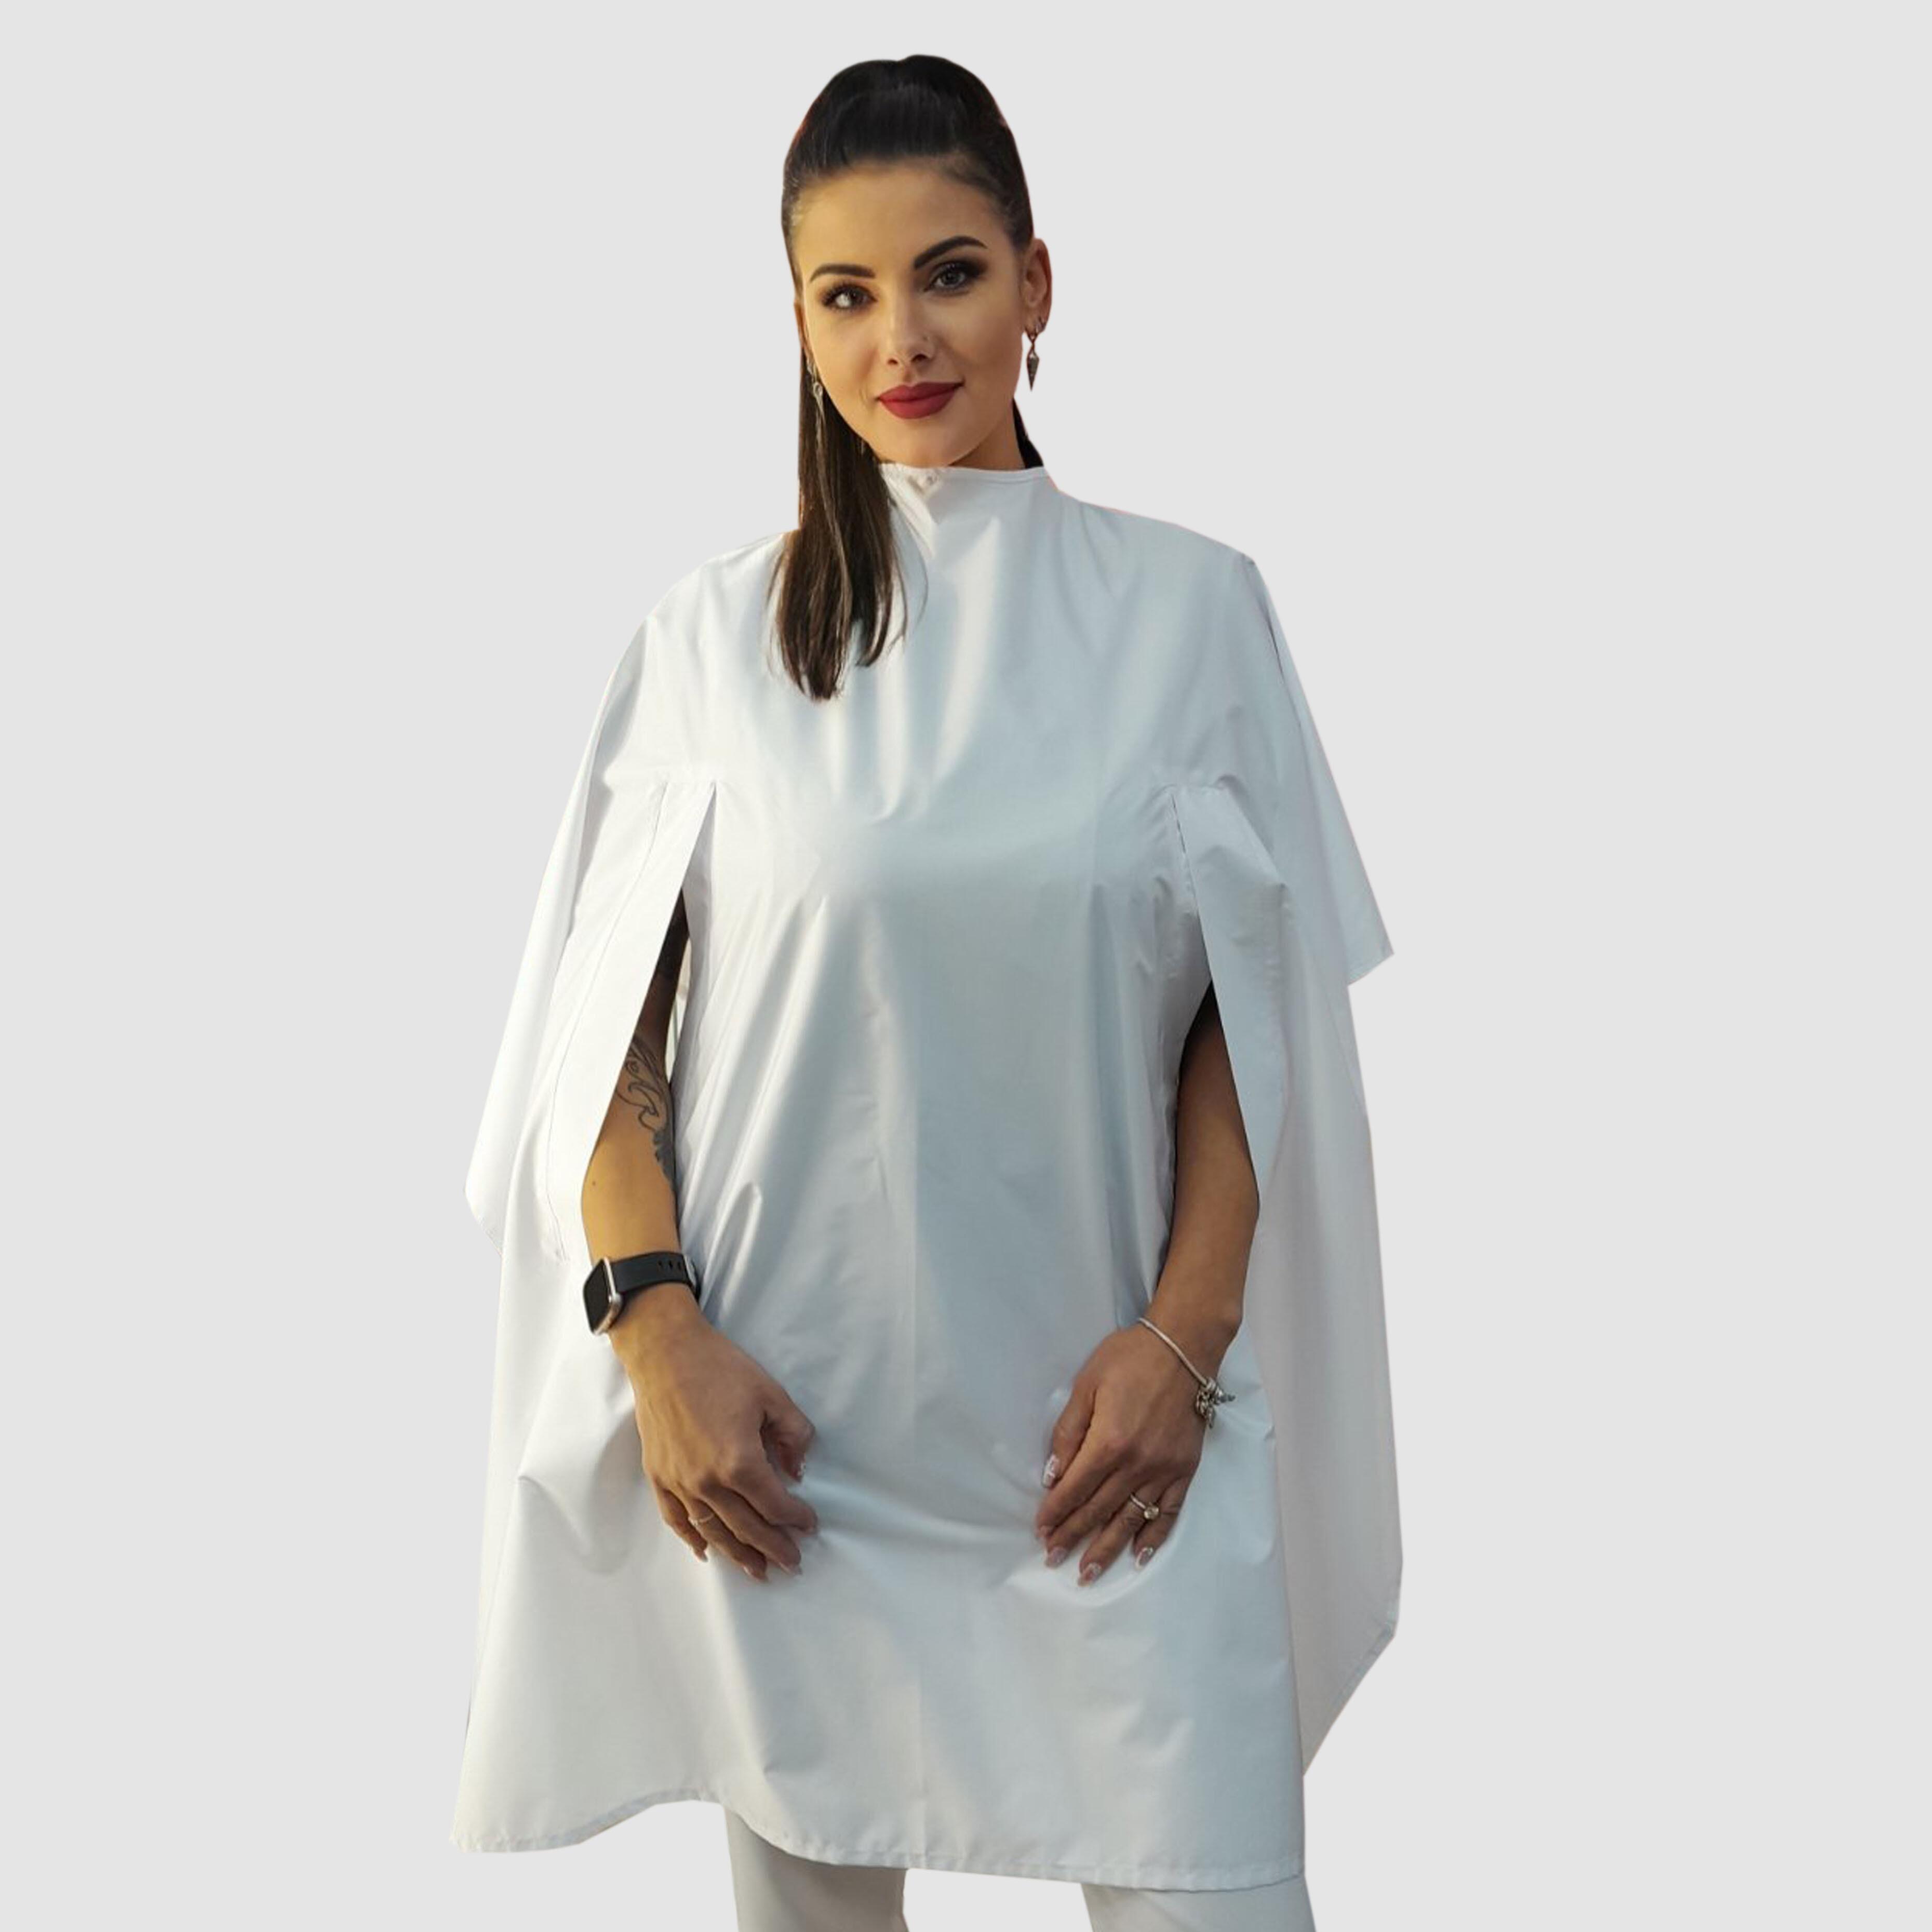 Nibano Hairdressing gown white with handsplit